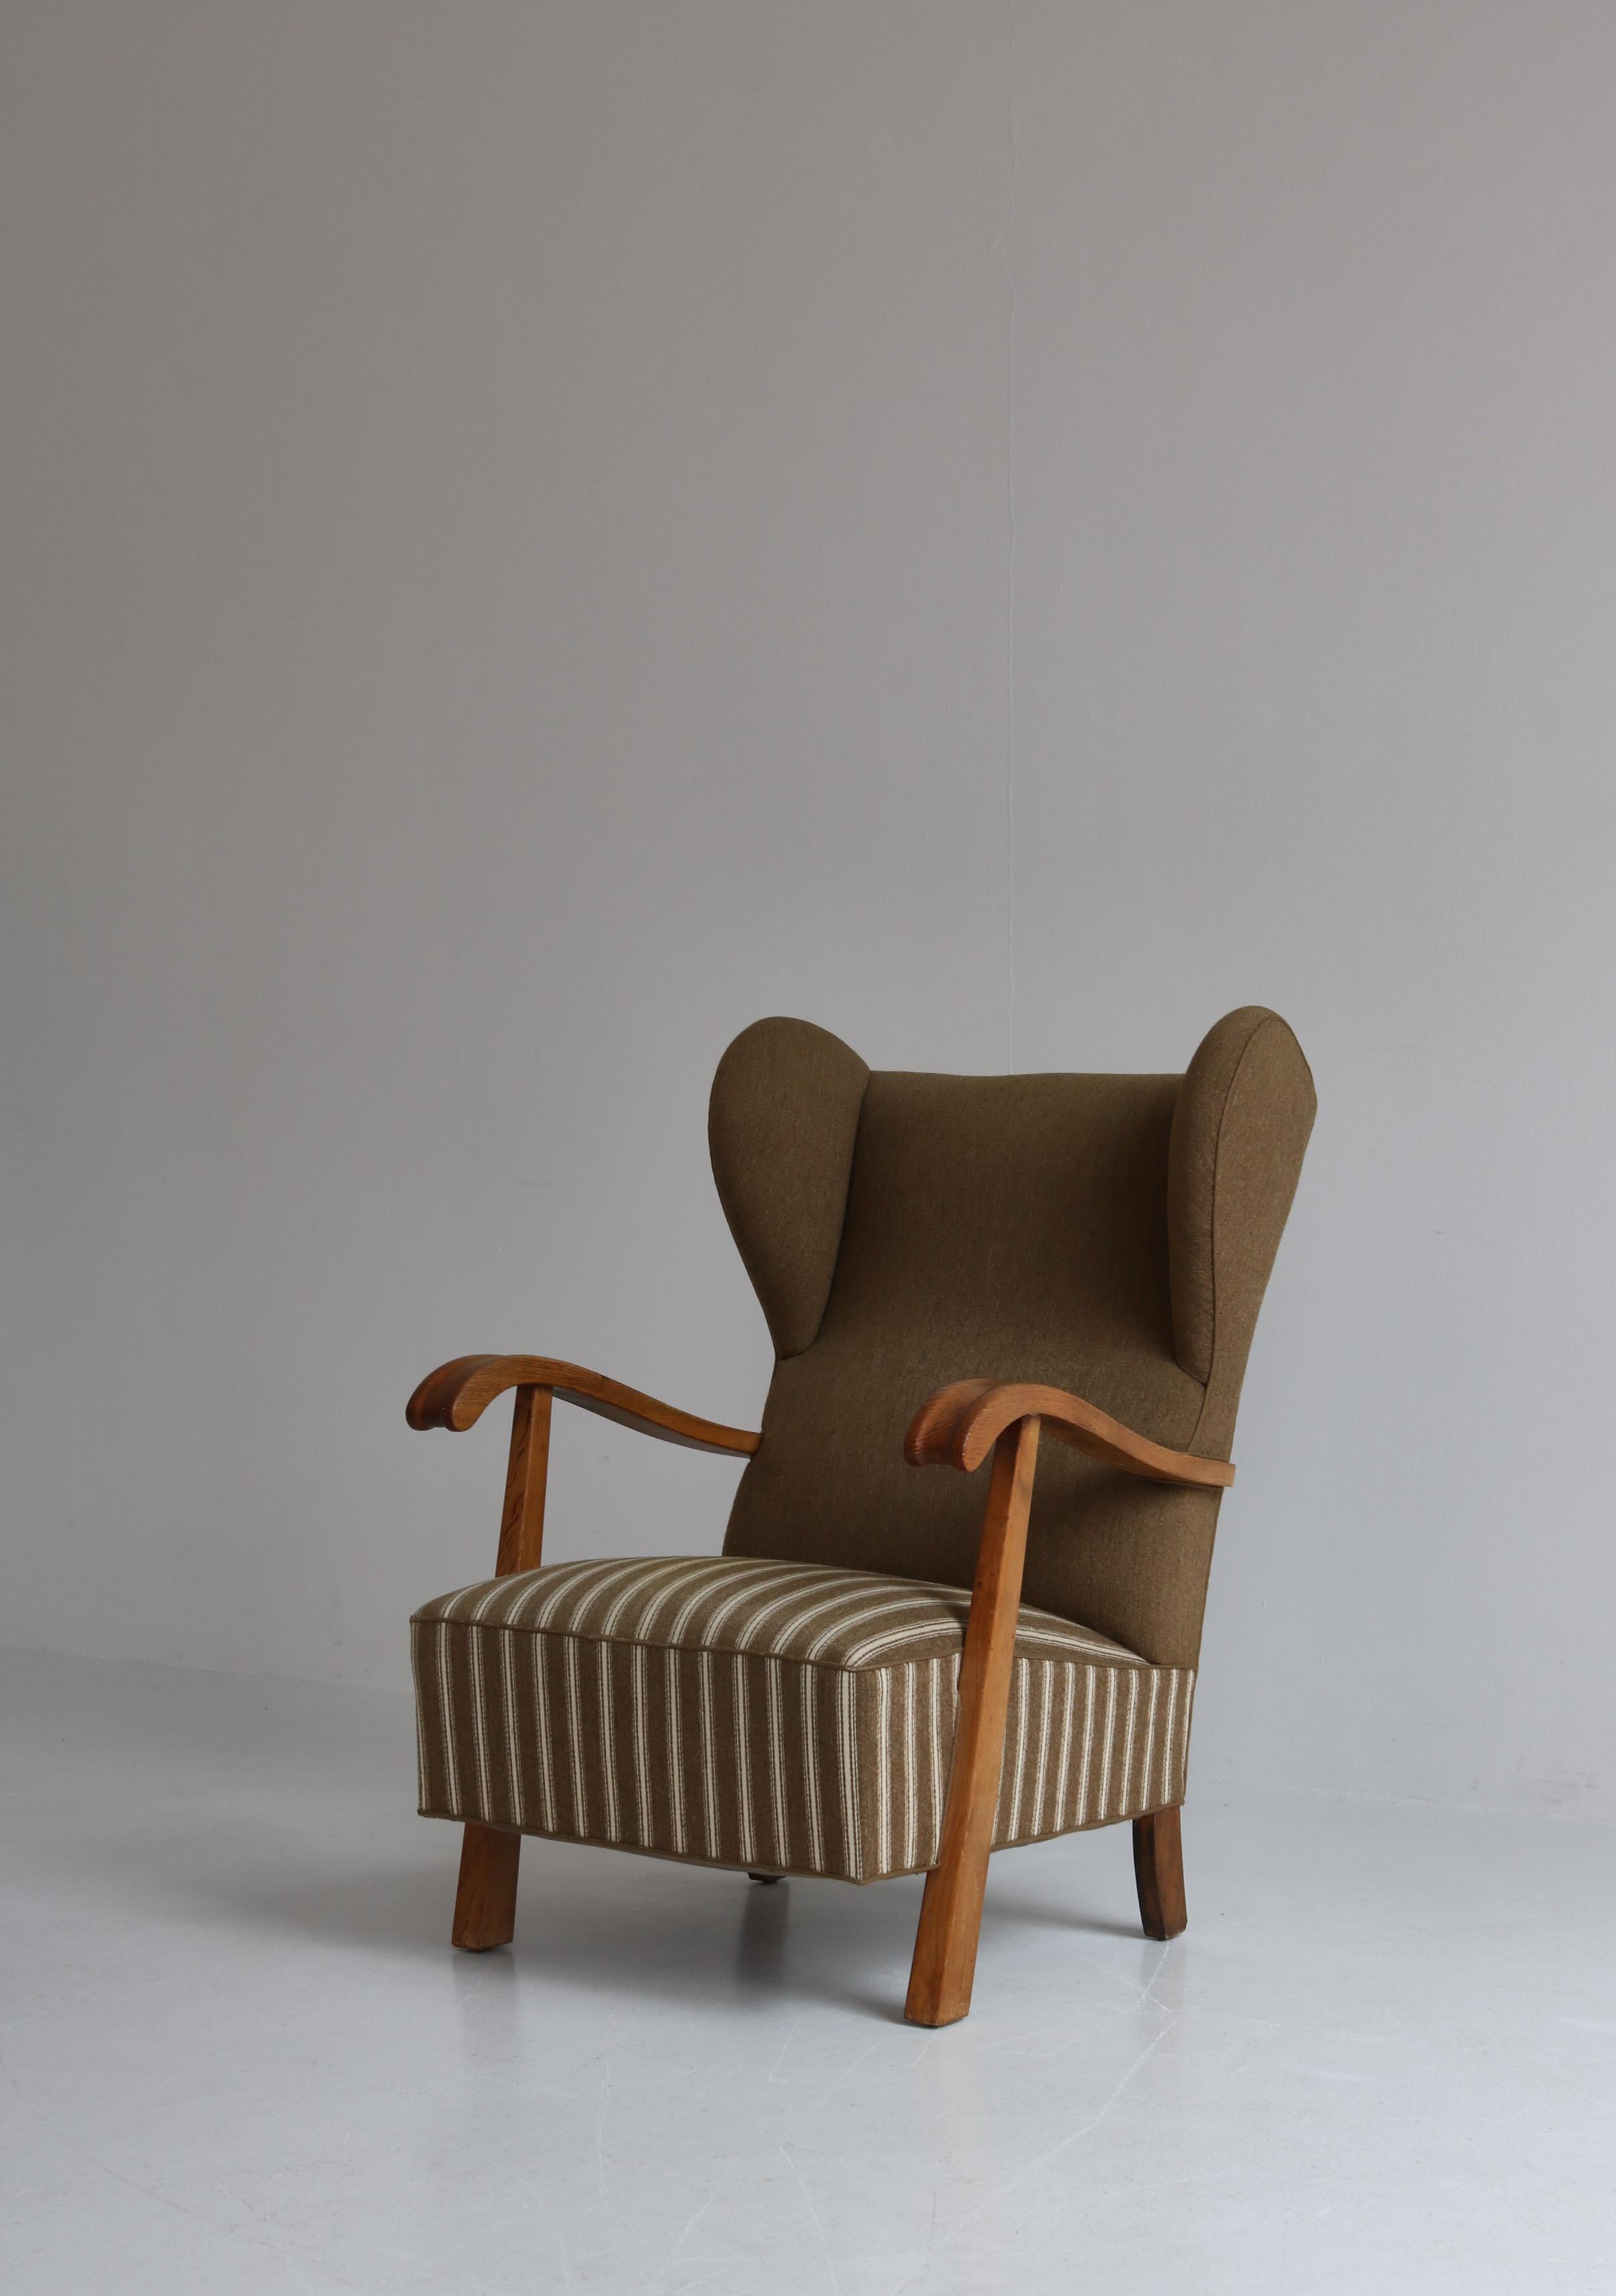 Large and sturdy 1940s wingback lounge chair attributed to Fritz Hansen, Copenhagen. Beautiful Danish design with wonderful sculpted armrests in solid patinated oak. The chair is upholstered in seat and back with iron spring cushions in Savak